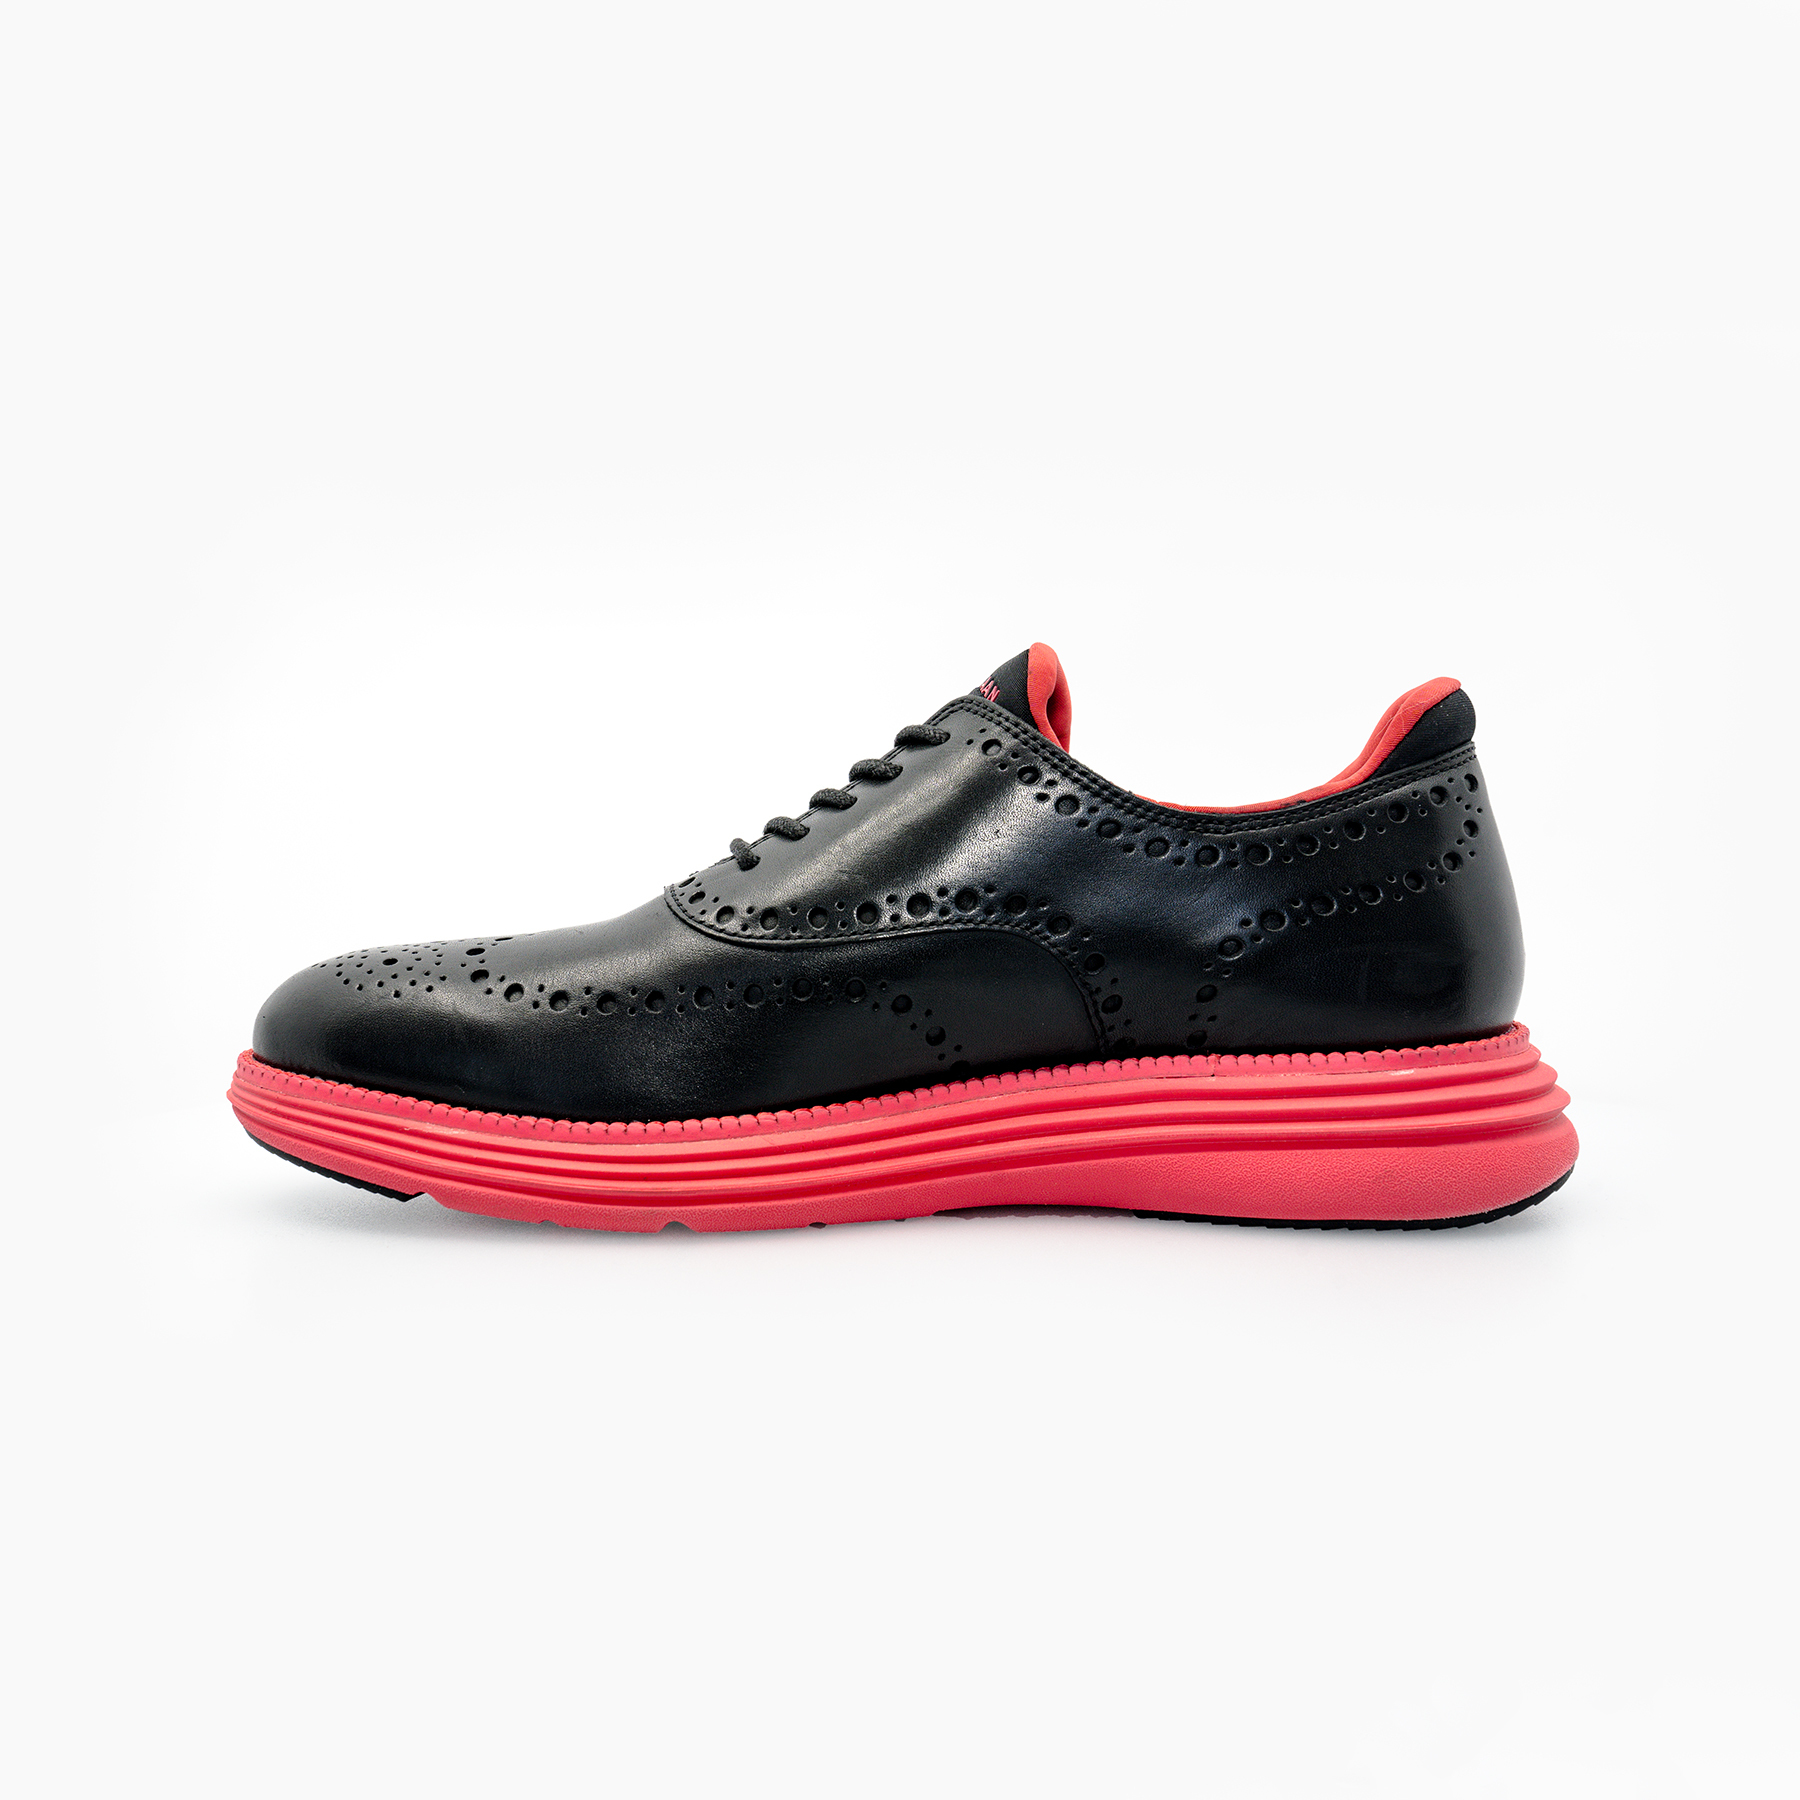 COLE HAAN PH - Just dropped: Cole Haan x STAPLE